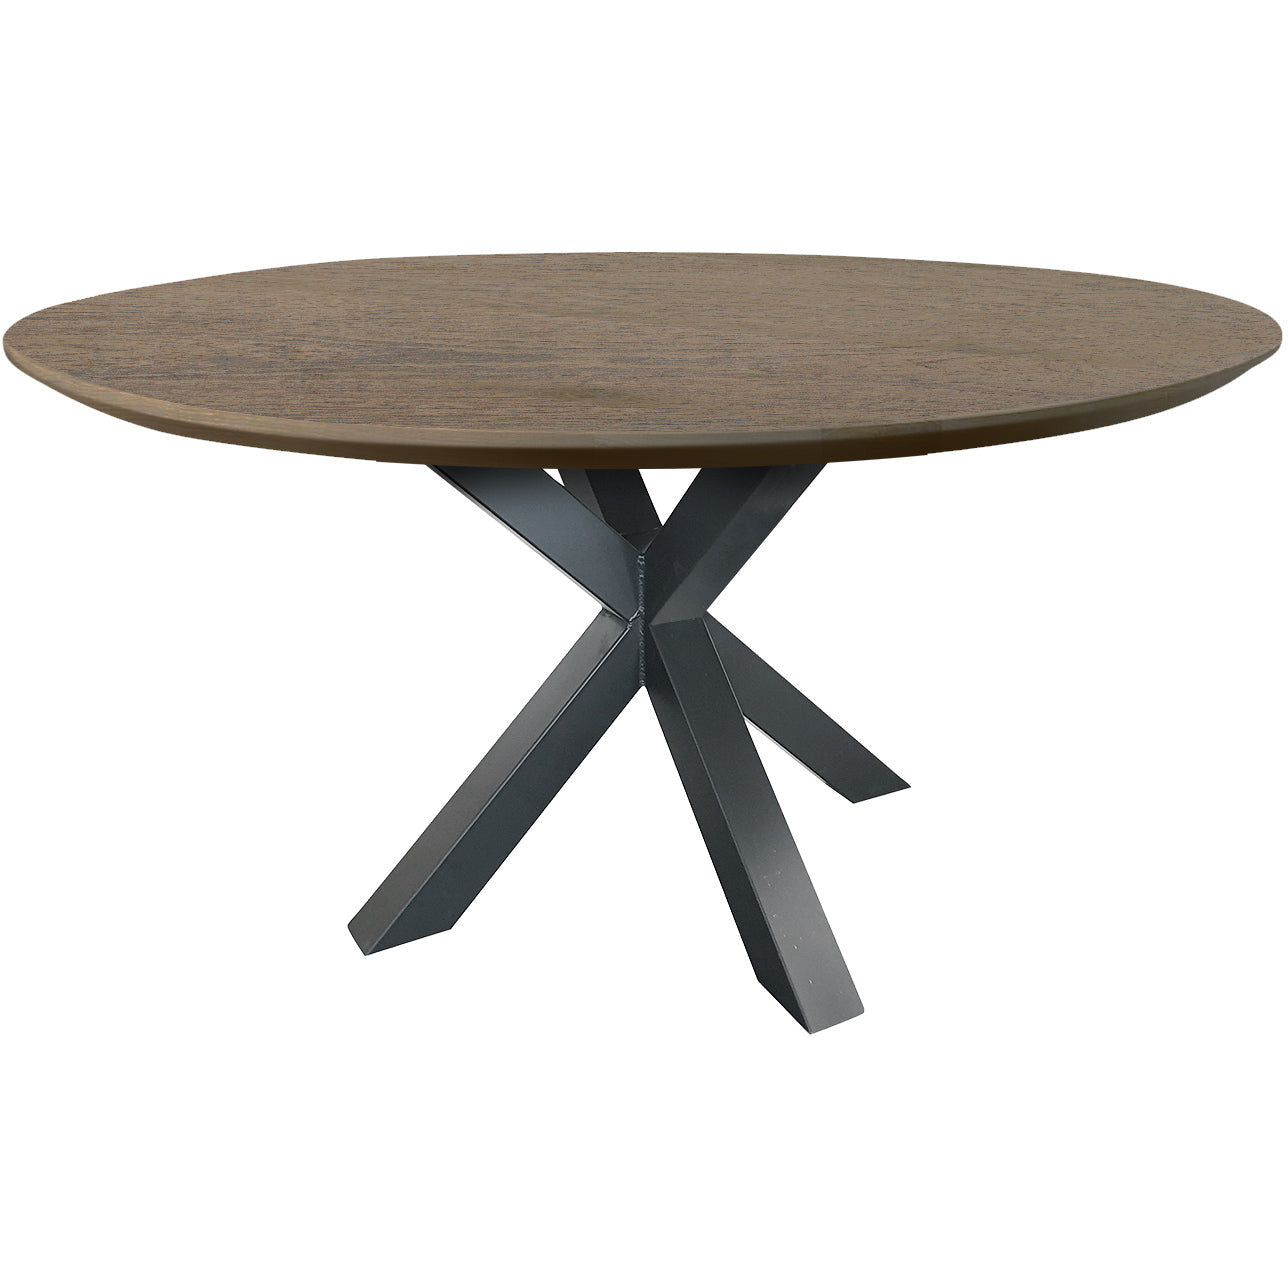 Dining table | Round | Smoked | Oak wood | Lacquered Spider Leg |